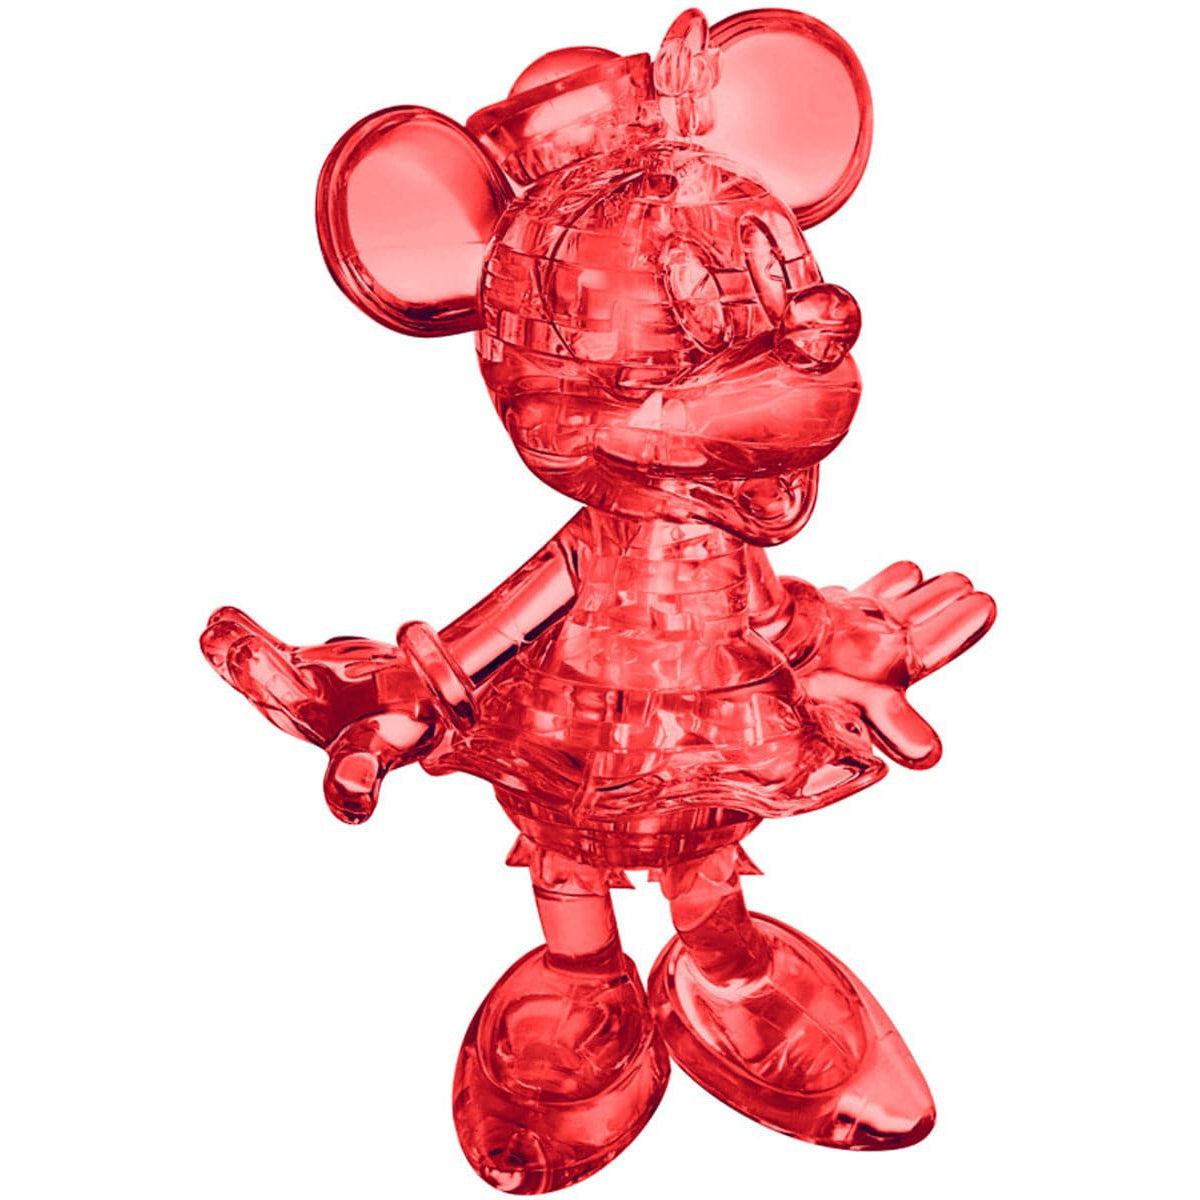 3D Disney Crystal Puzzle - Red Minnie Mouse